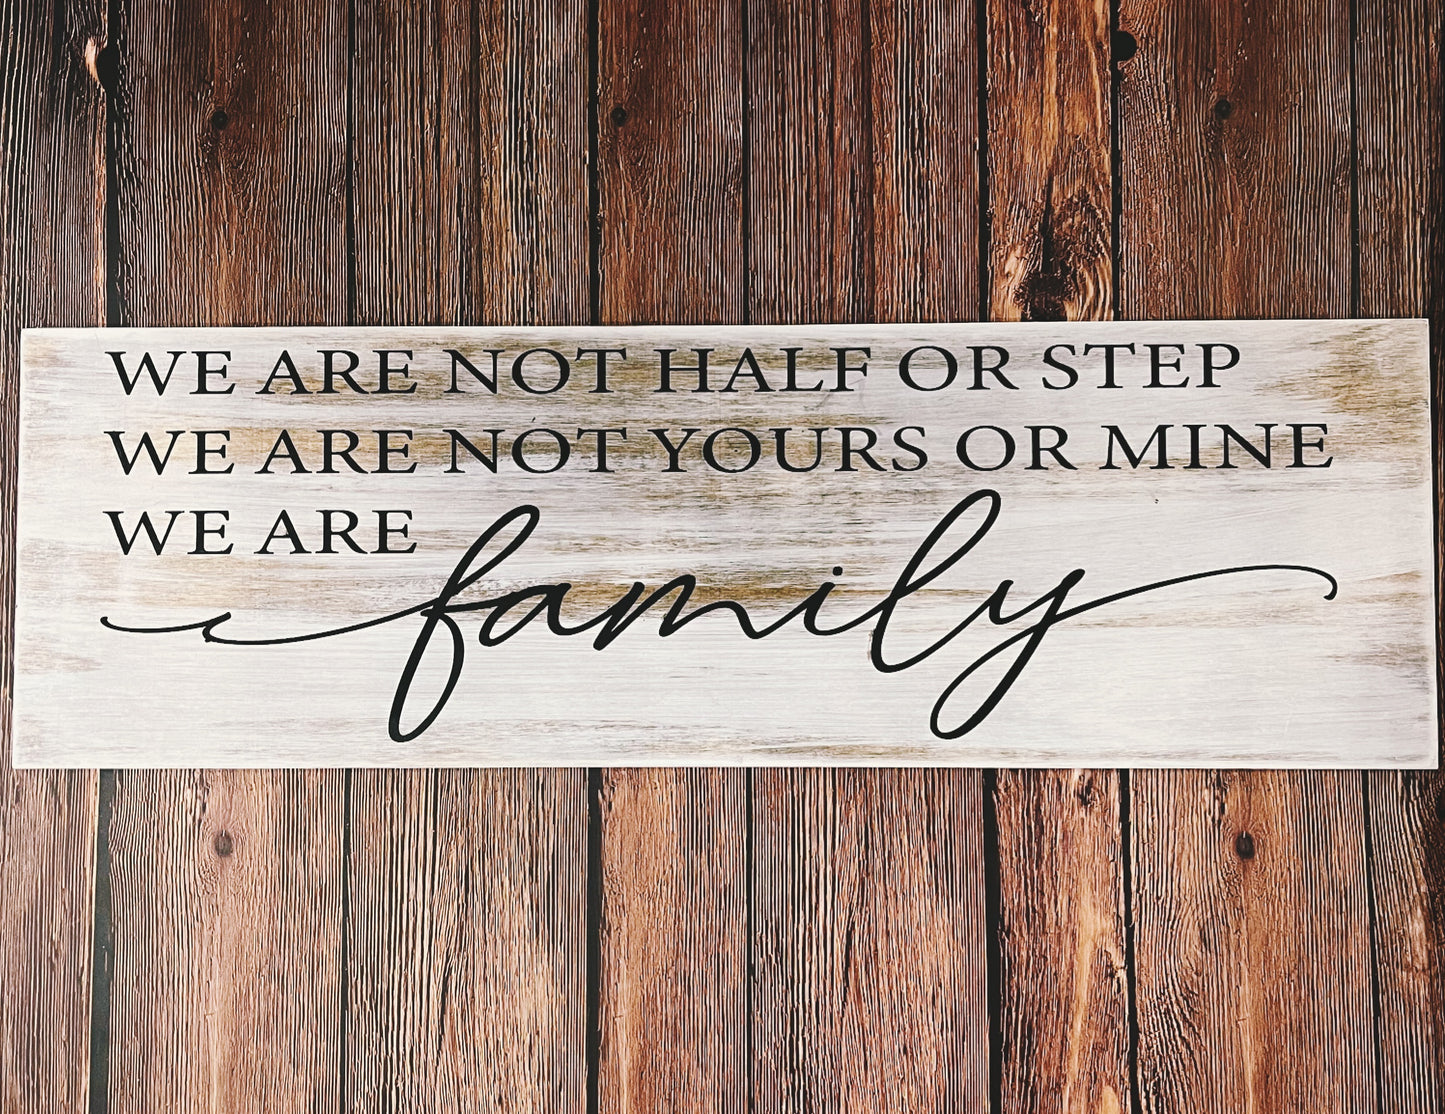 PAINTED - We Are Not Half or Step. We are Not Yours or Mine. We Are FAMILY. 8x24" Plank